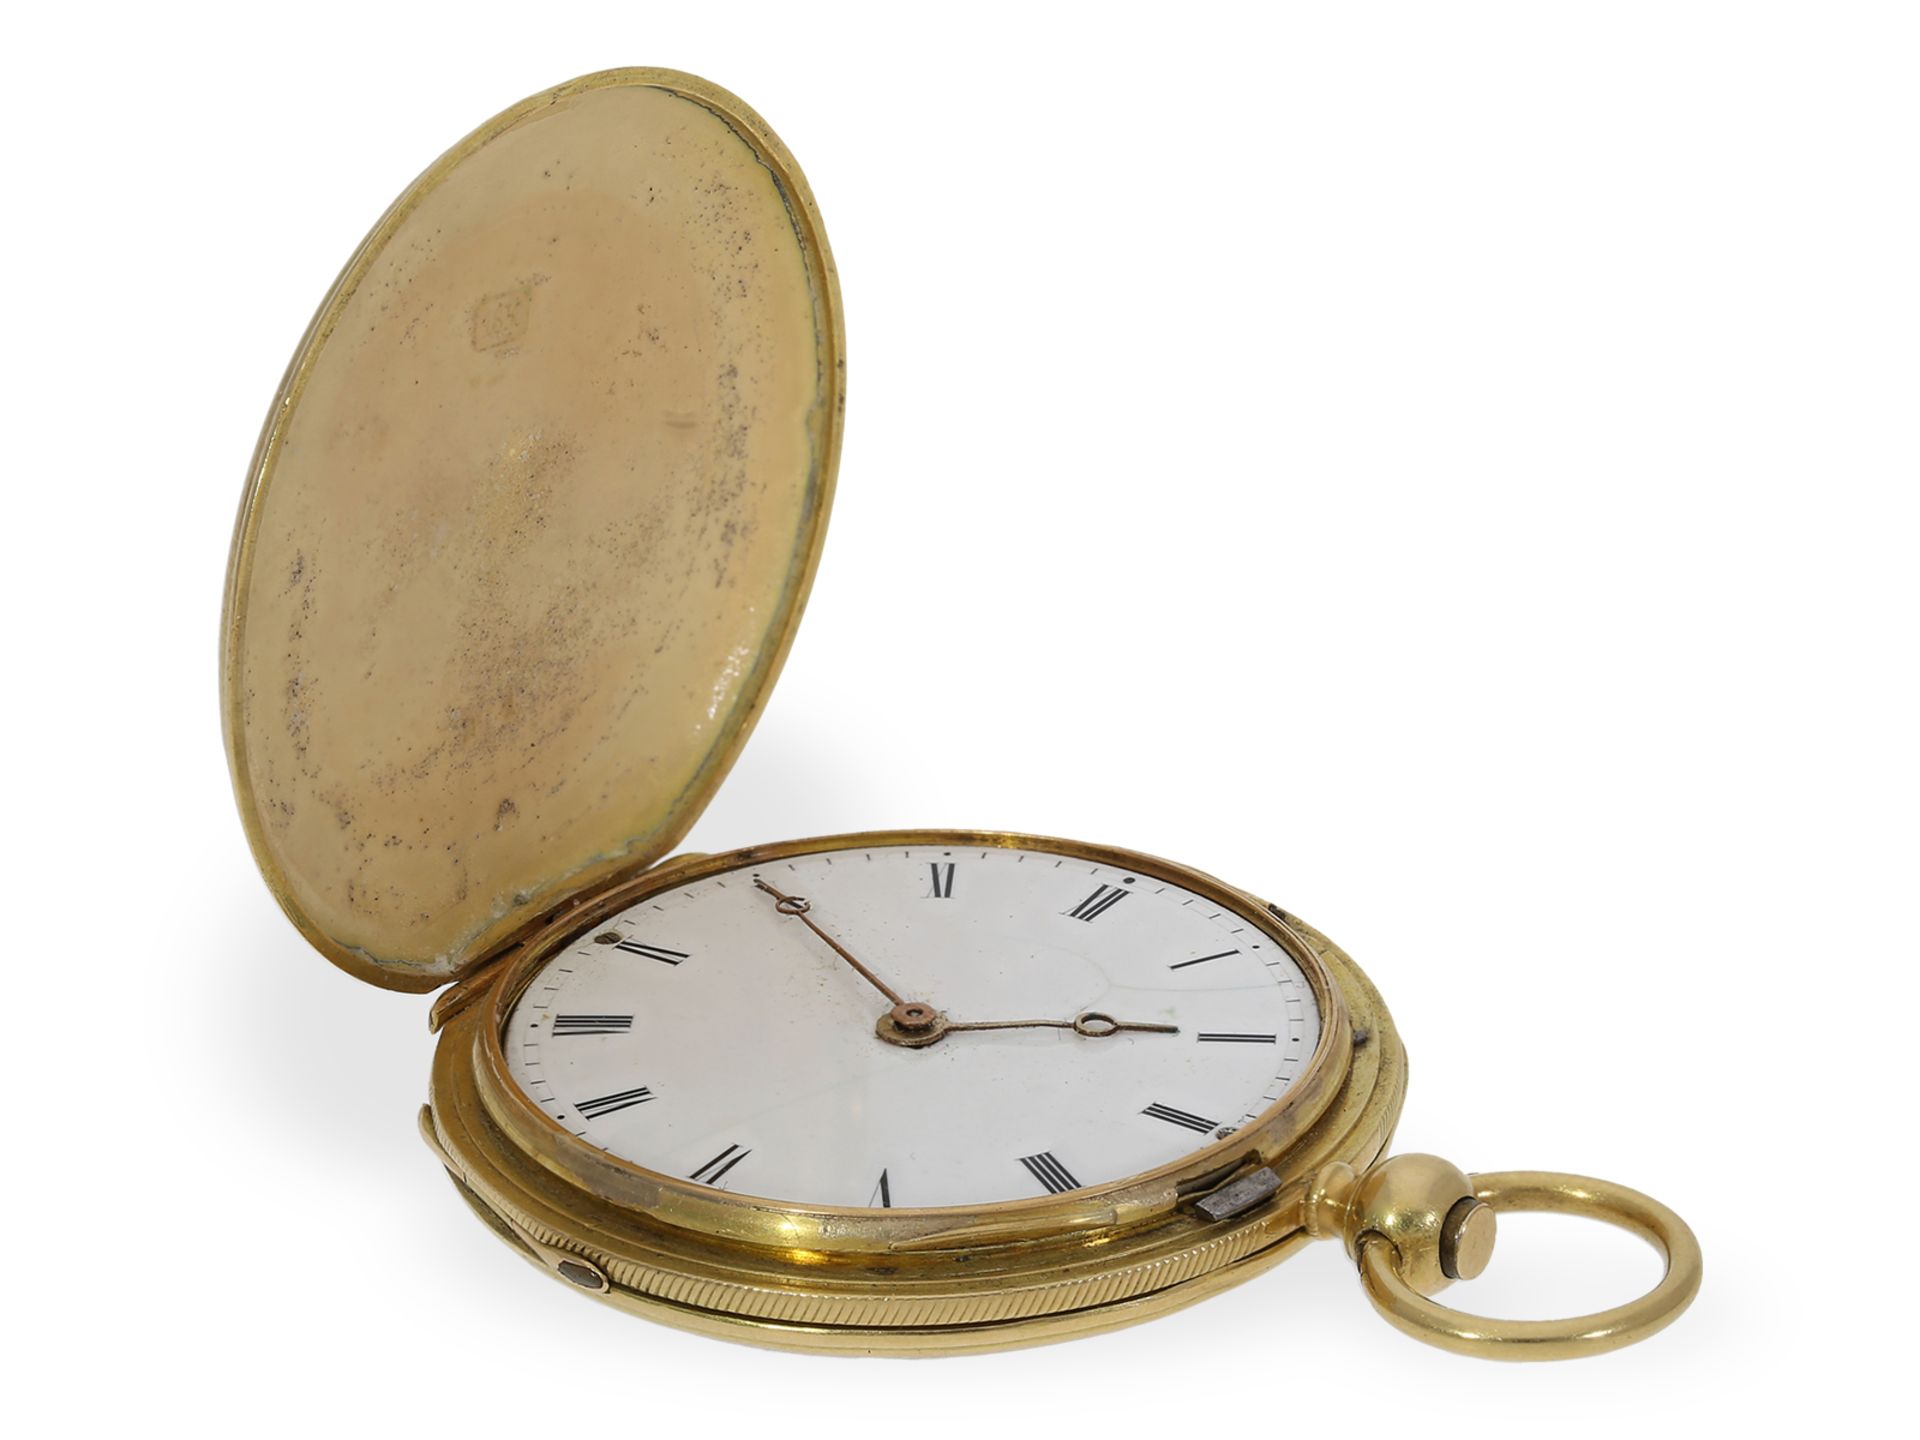 Pocket watch: top-quality gold/enamel hunting case watch, Henry Capt Geneve, ca. 1830 - Image 6 of 10